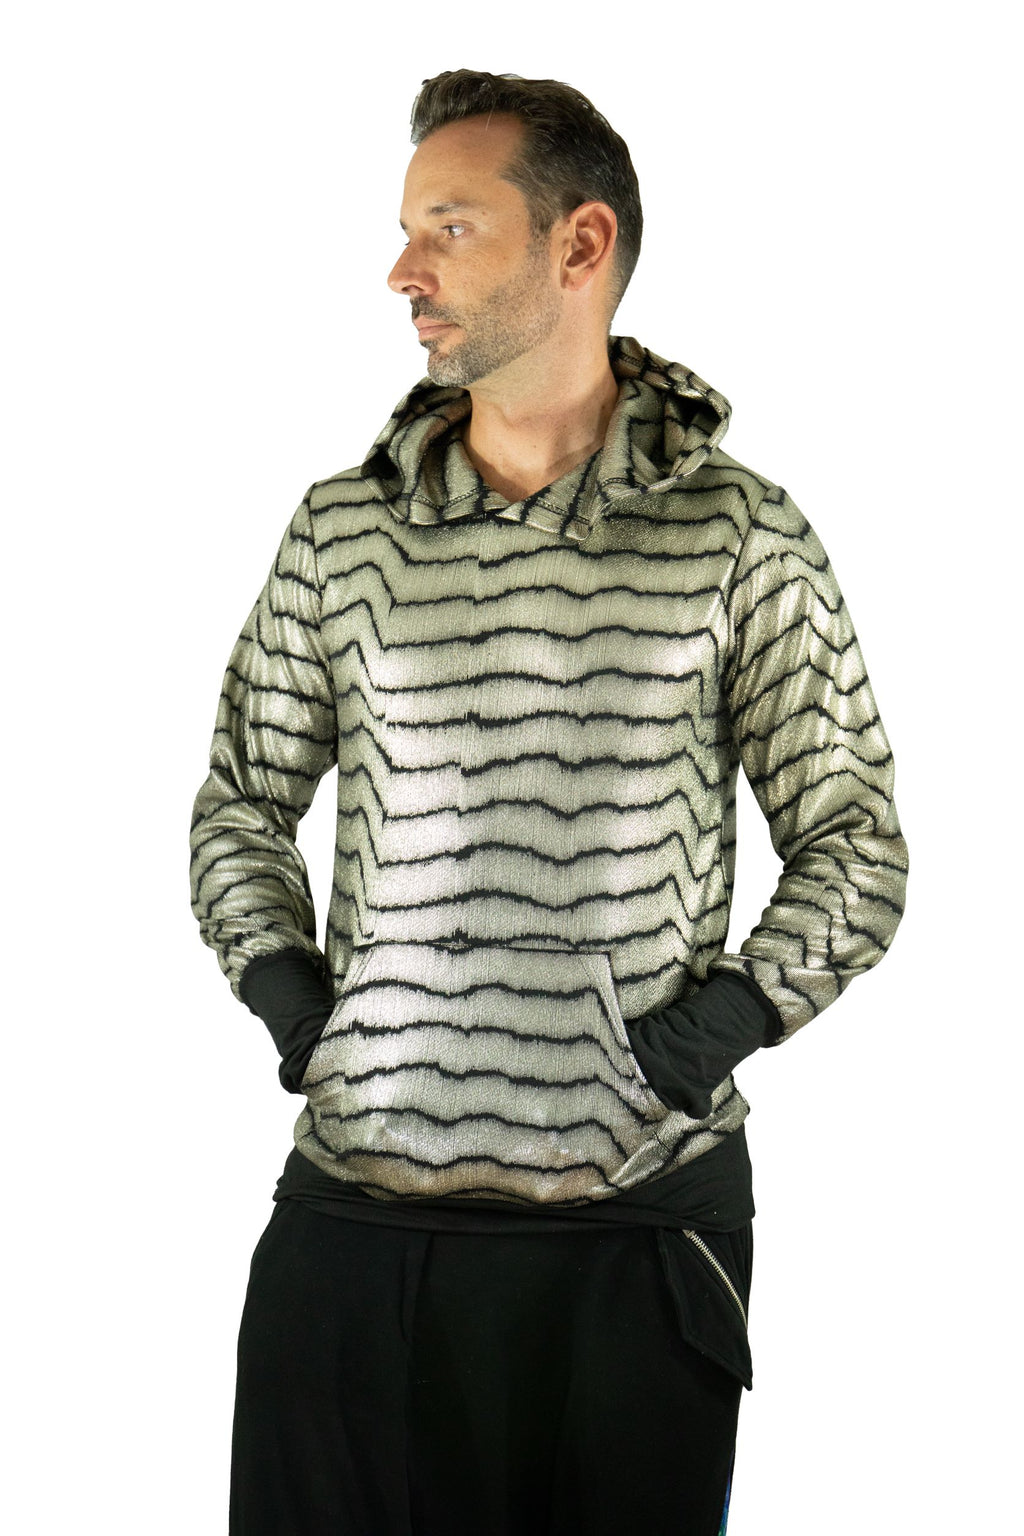 Metallic Striped Hoodie- LIMITED EDTION